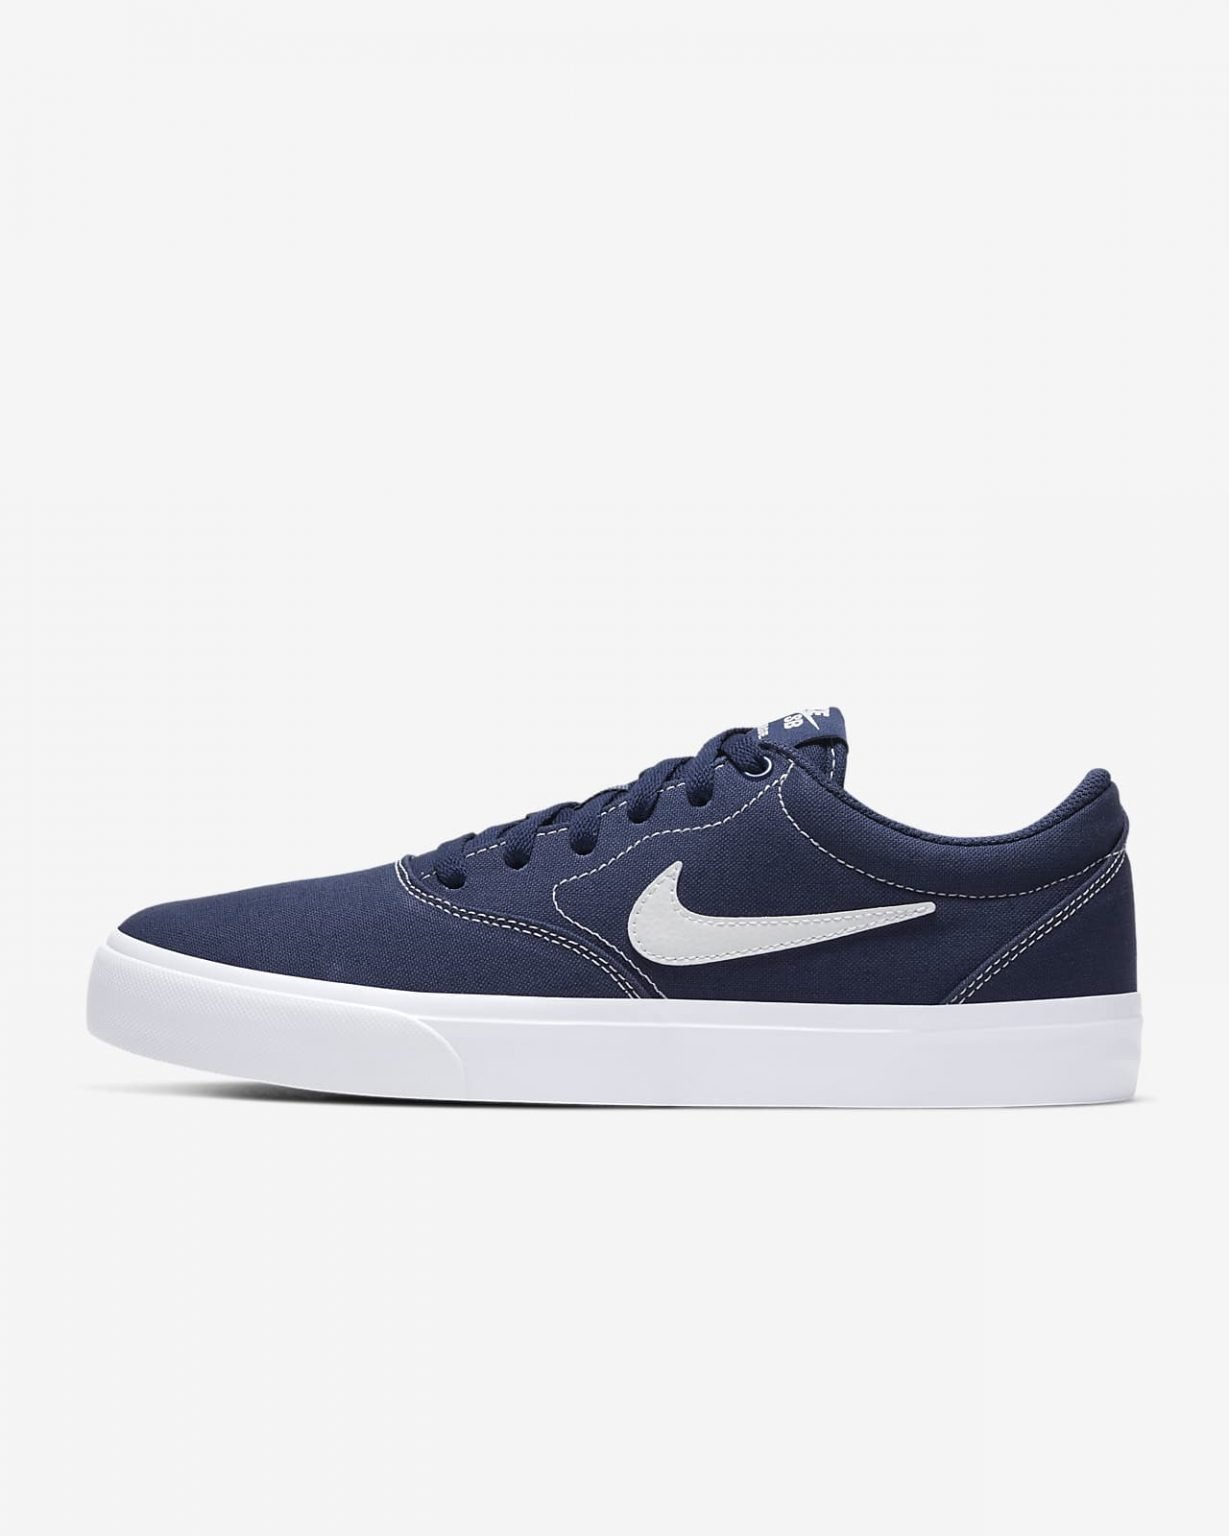 Shopping For Canvas Shoe Nikes that is trendy Online Now 2022